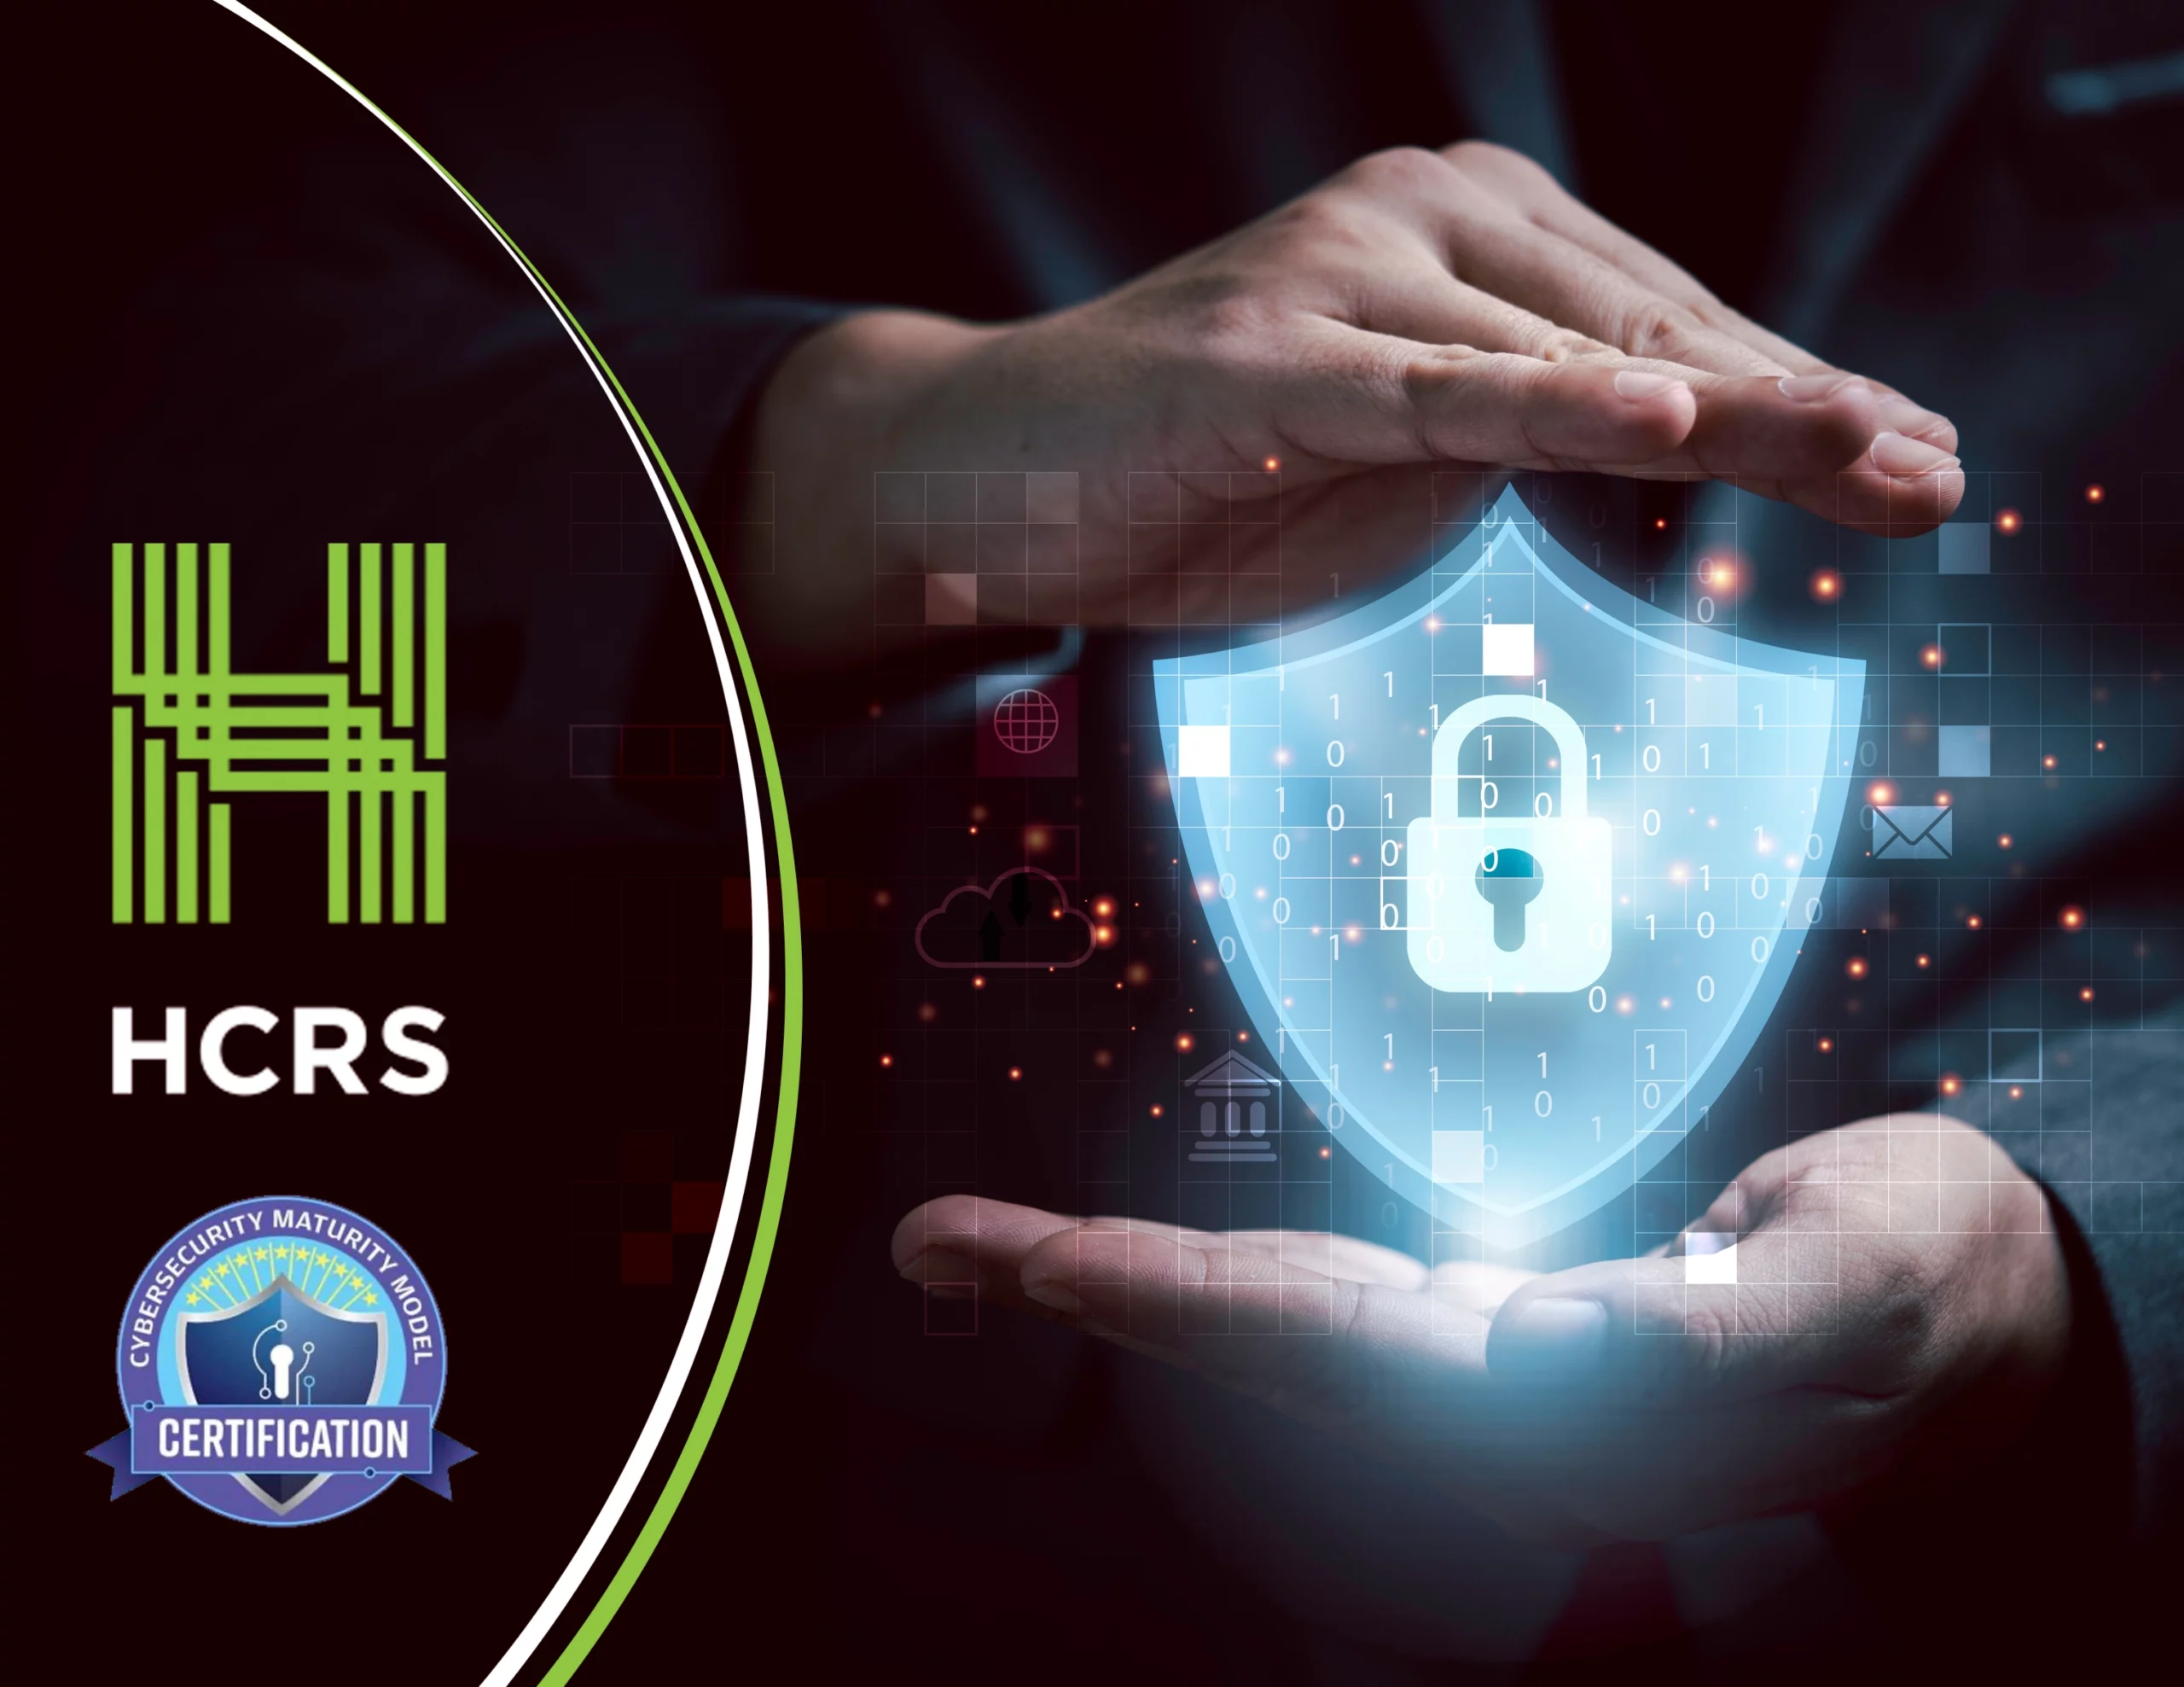 Hands form a frame around an illuminated shield and lock icon representing cybersecurity, beside the HCRS logo and a Cybersecurity Maturity Model Certification badge.